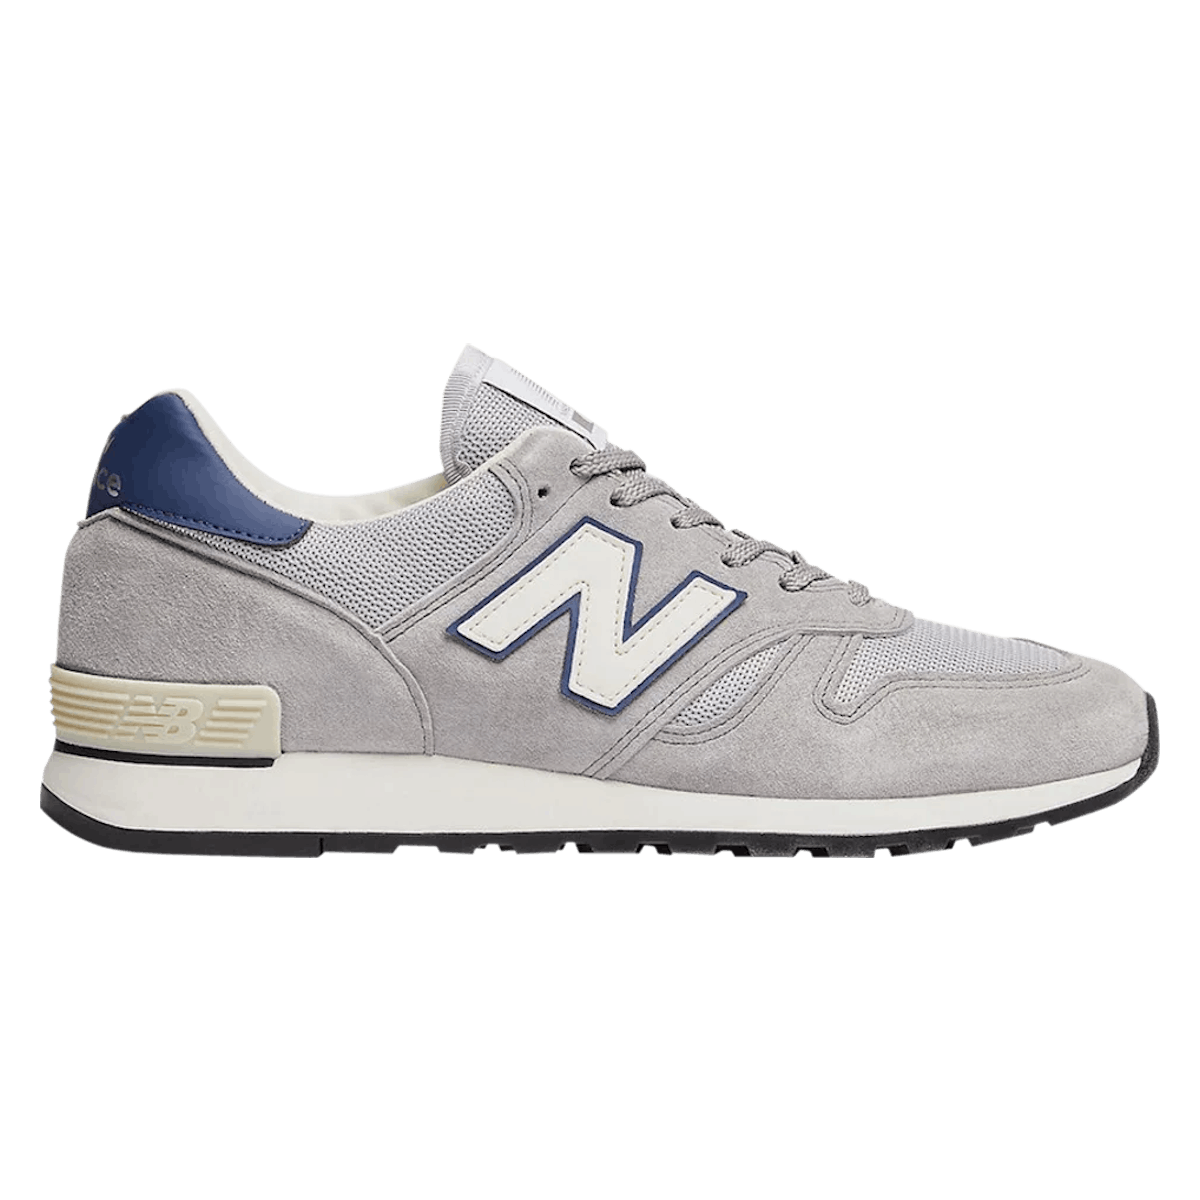 New Balance 670 Made in England "40th Anniversary"